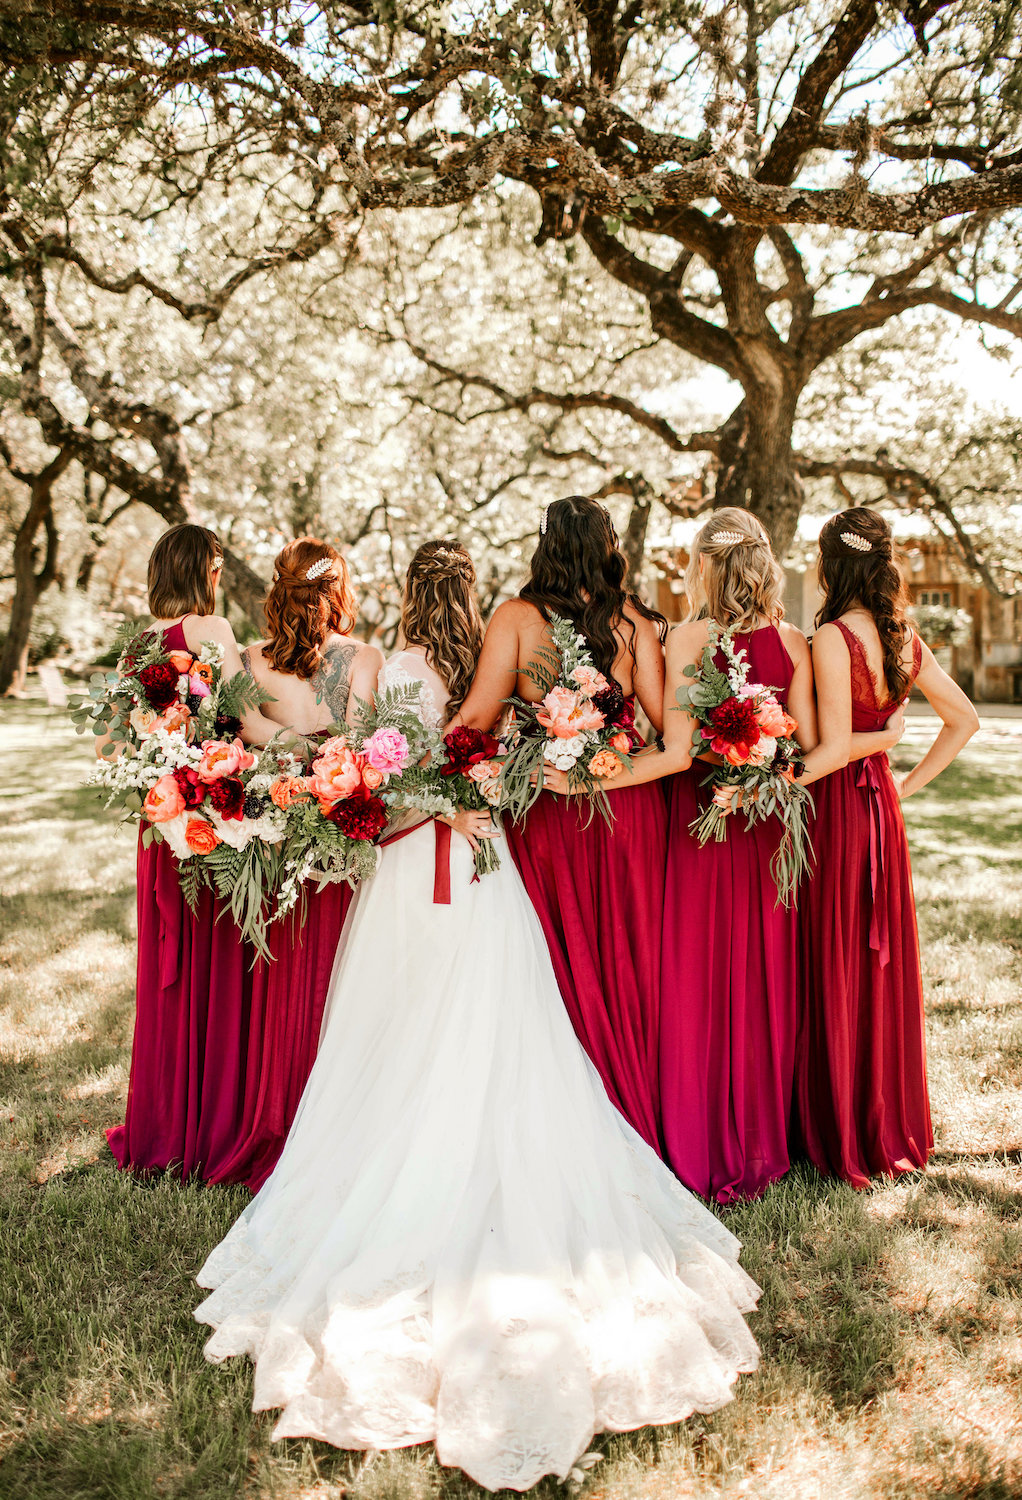 Bride and bridesmaids in red